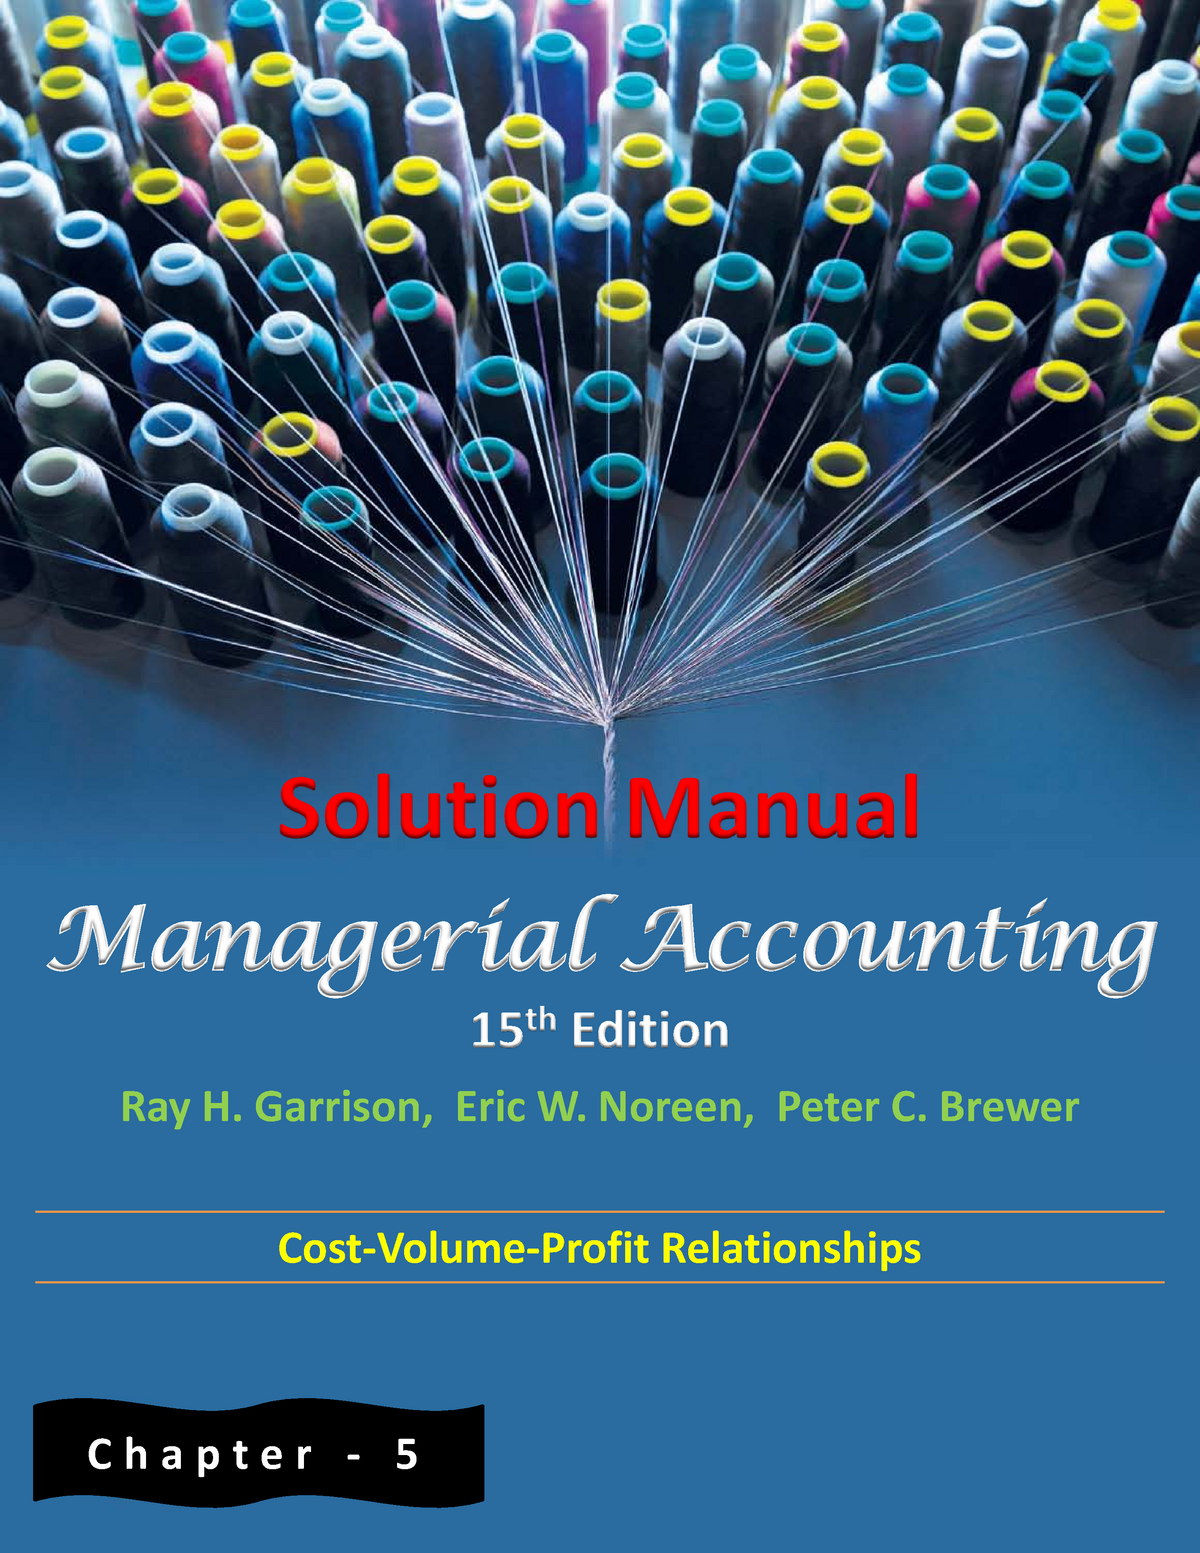 Solution Manual of Chapter 5 Managerial Accounting 15th Edition (Ray